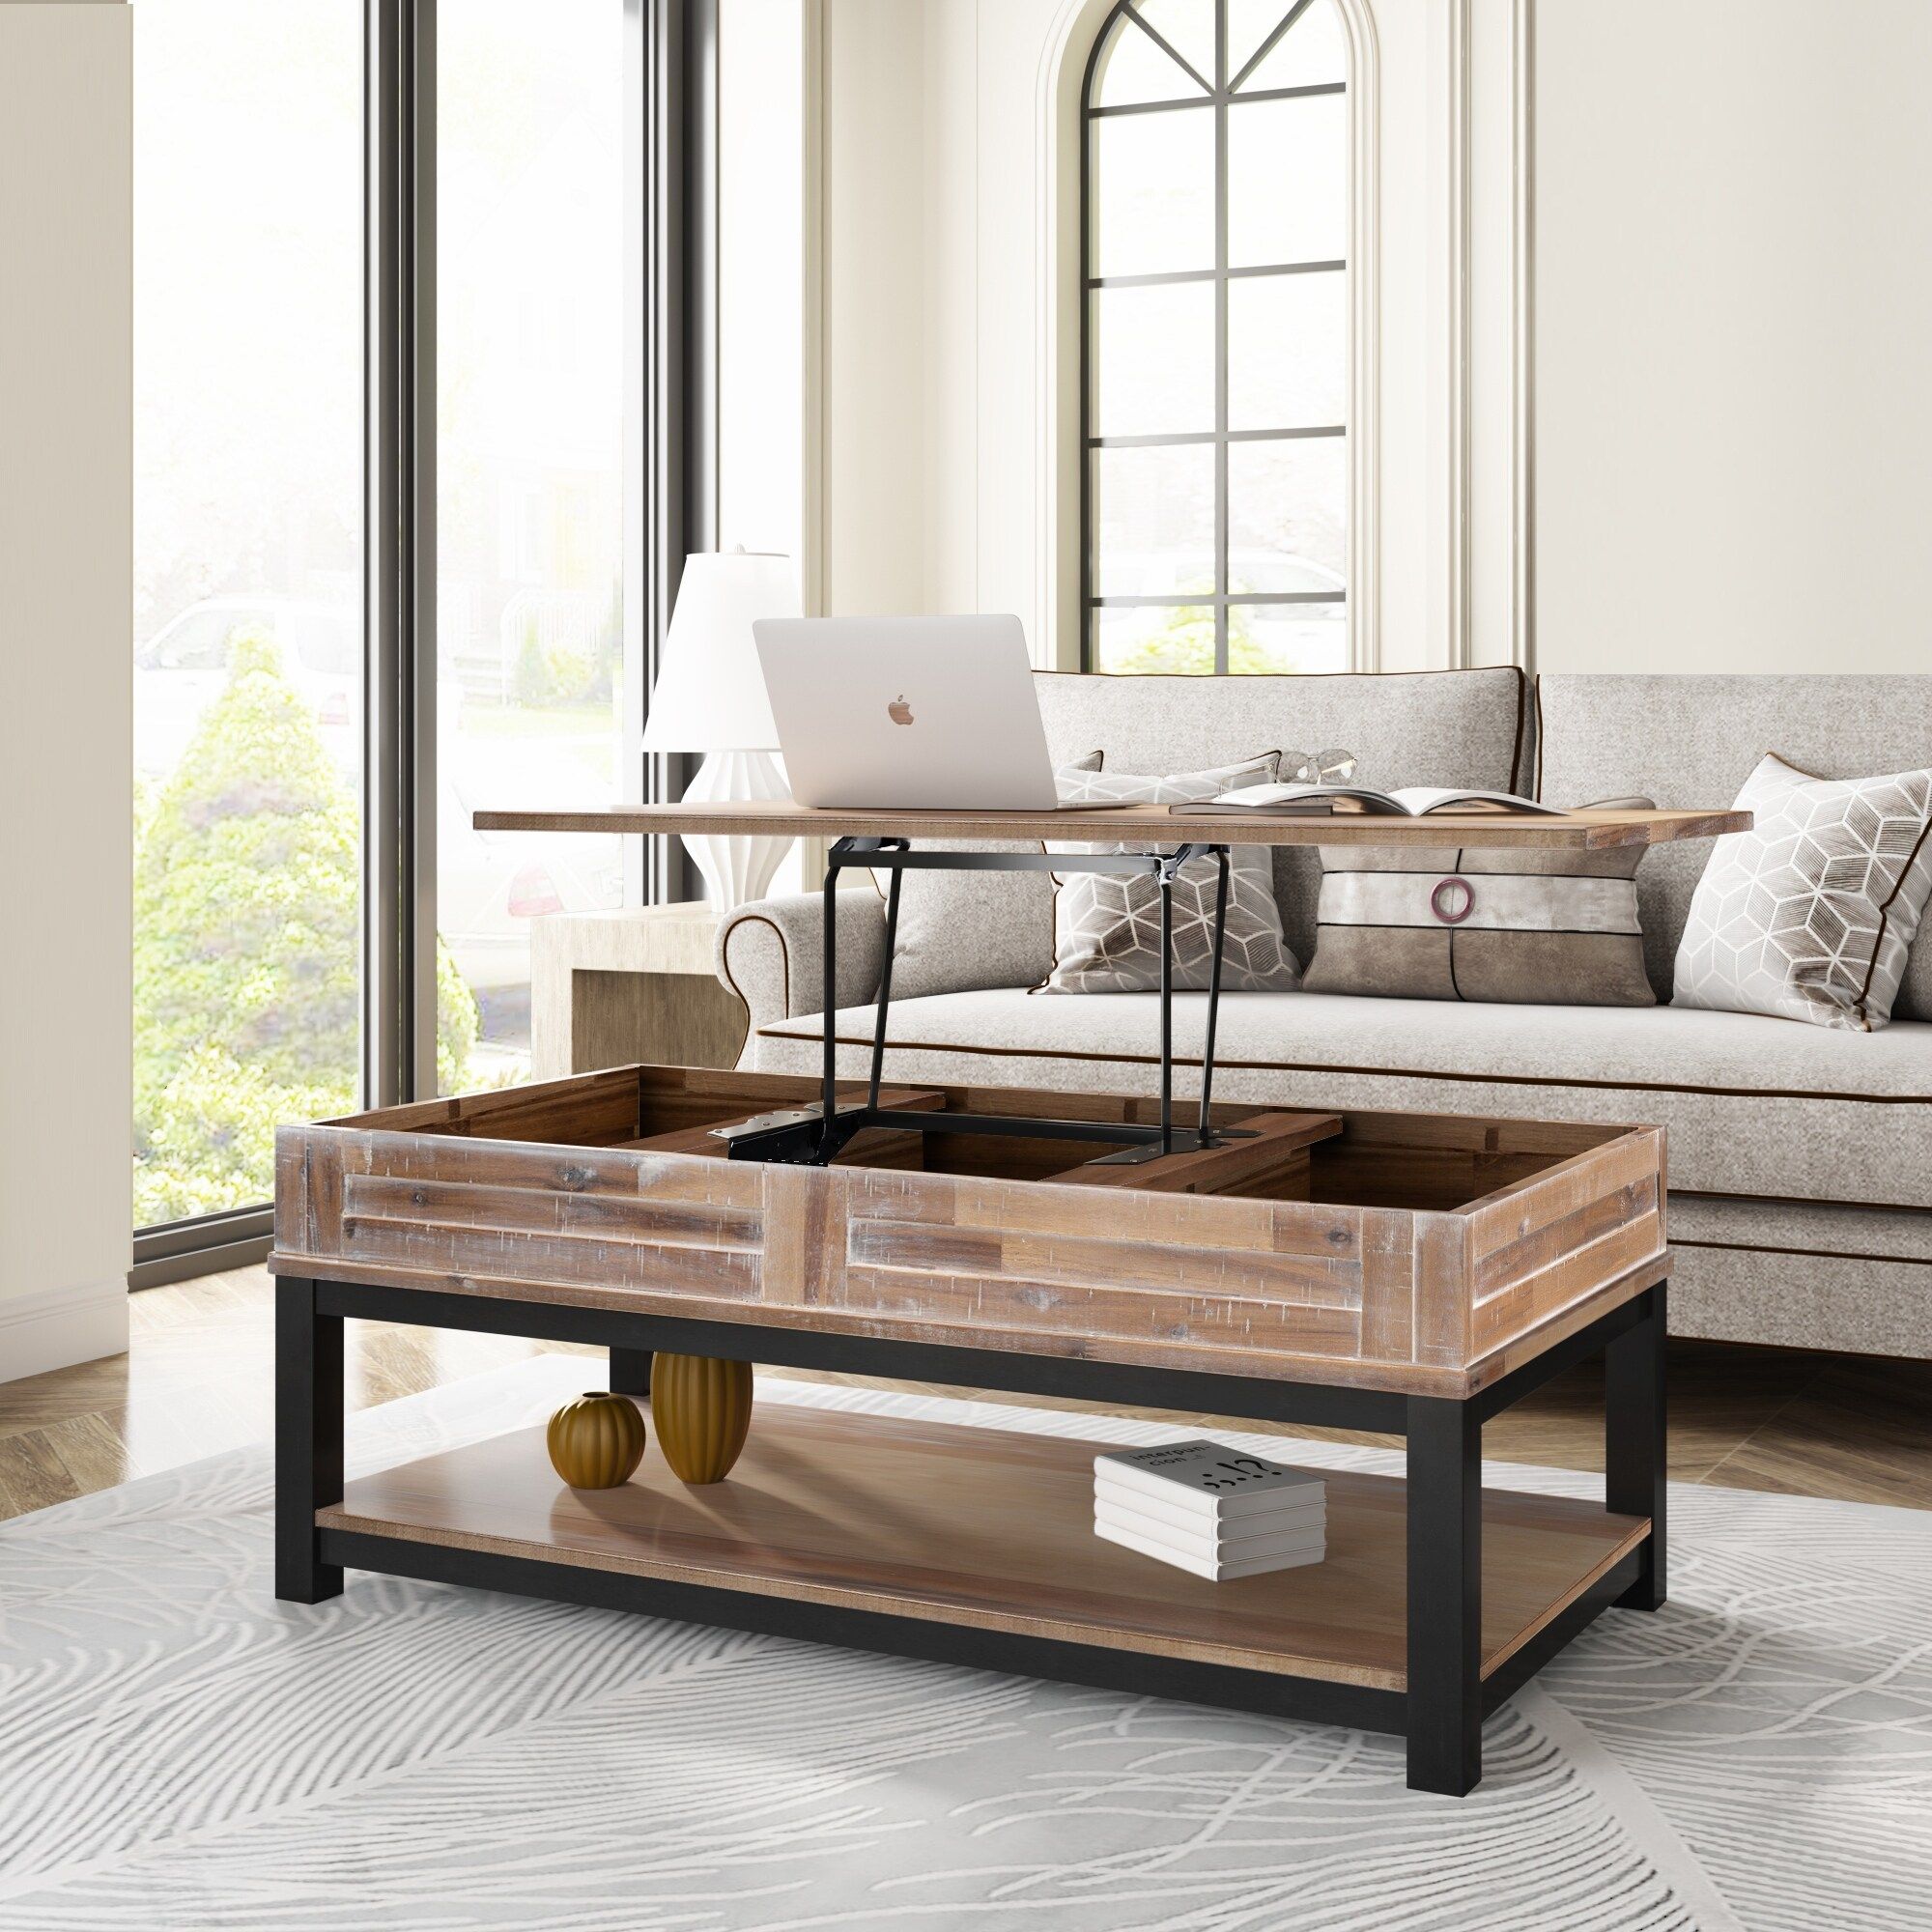 Wooden Lift Top Coffee Table With Inner Storage Space And Shelf – Bed Bath  & Beyond – 36909922 Regarding Lift Top Coffee Tables With Shelves (View 10 of 15)